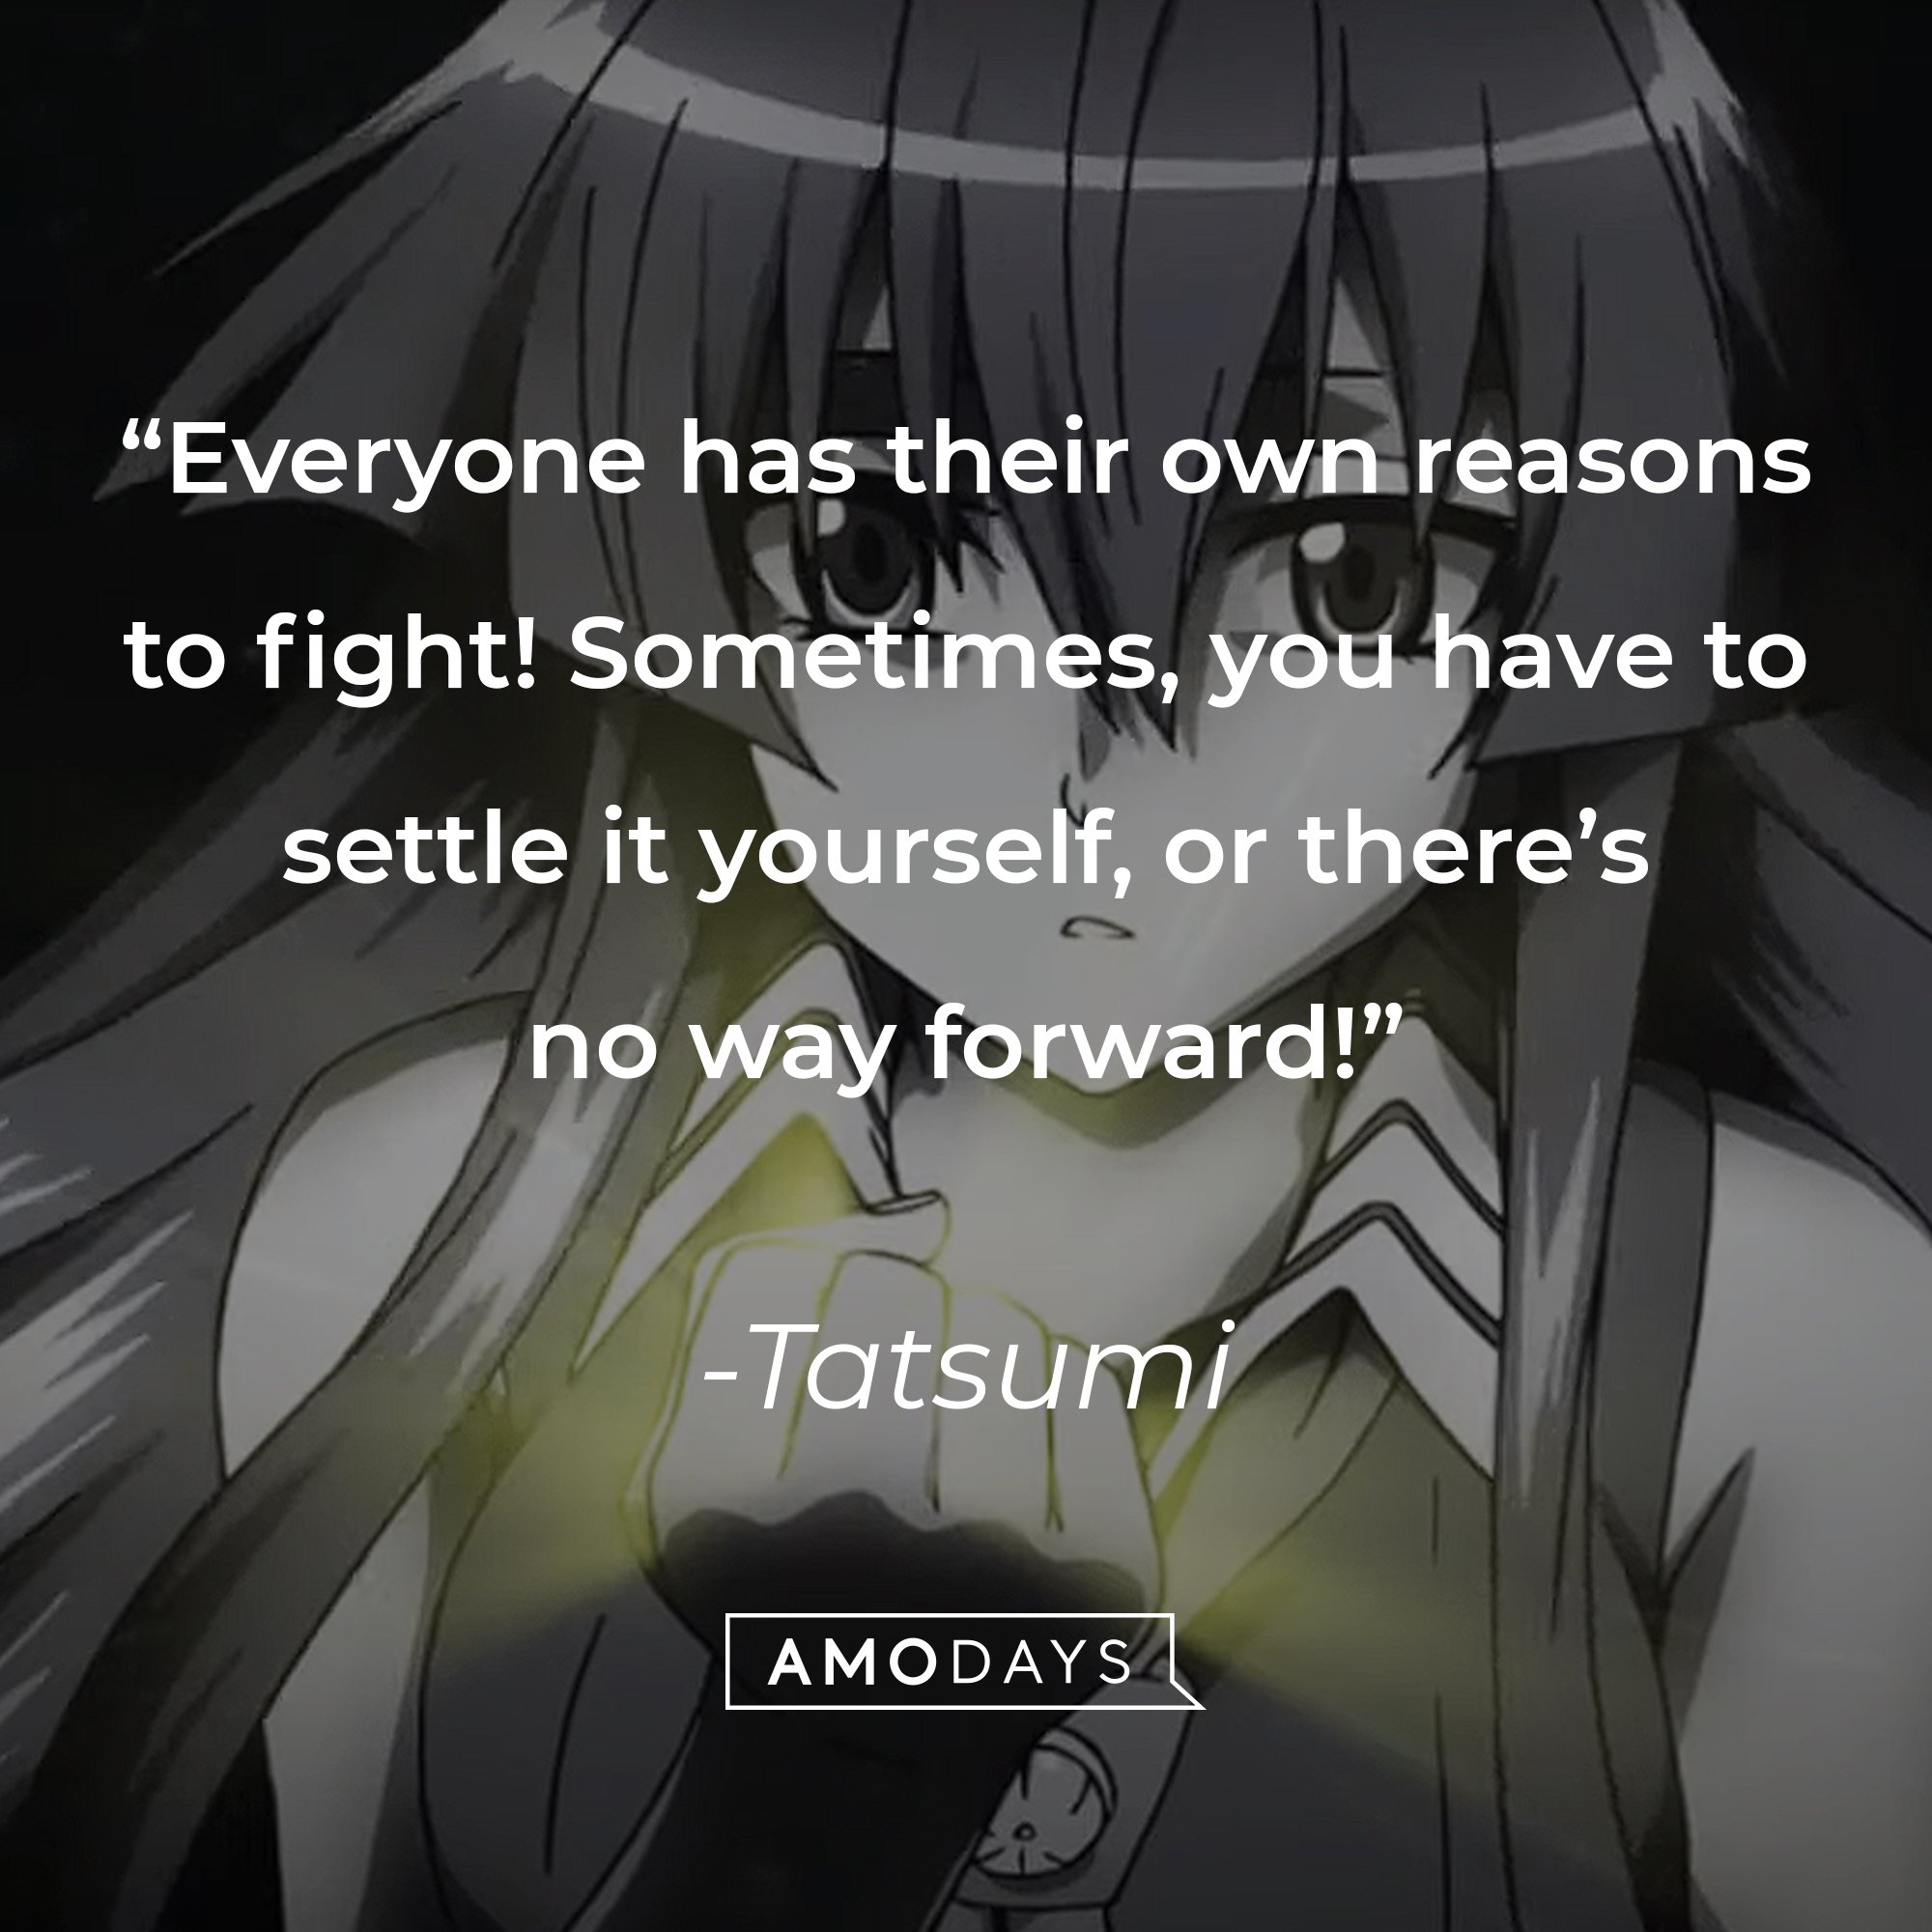 Tatsumi’s quote: “Everyone has their own reasons to fight! Sometimes, you have to settle it yourself, or there’s no way forward!” | Image: AmoDays